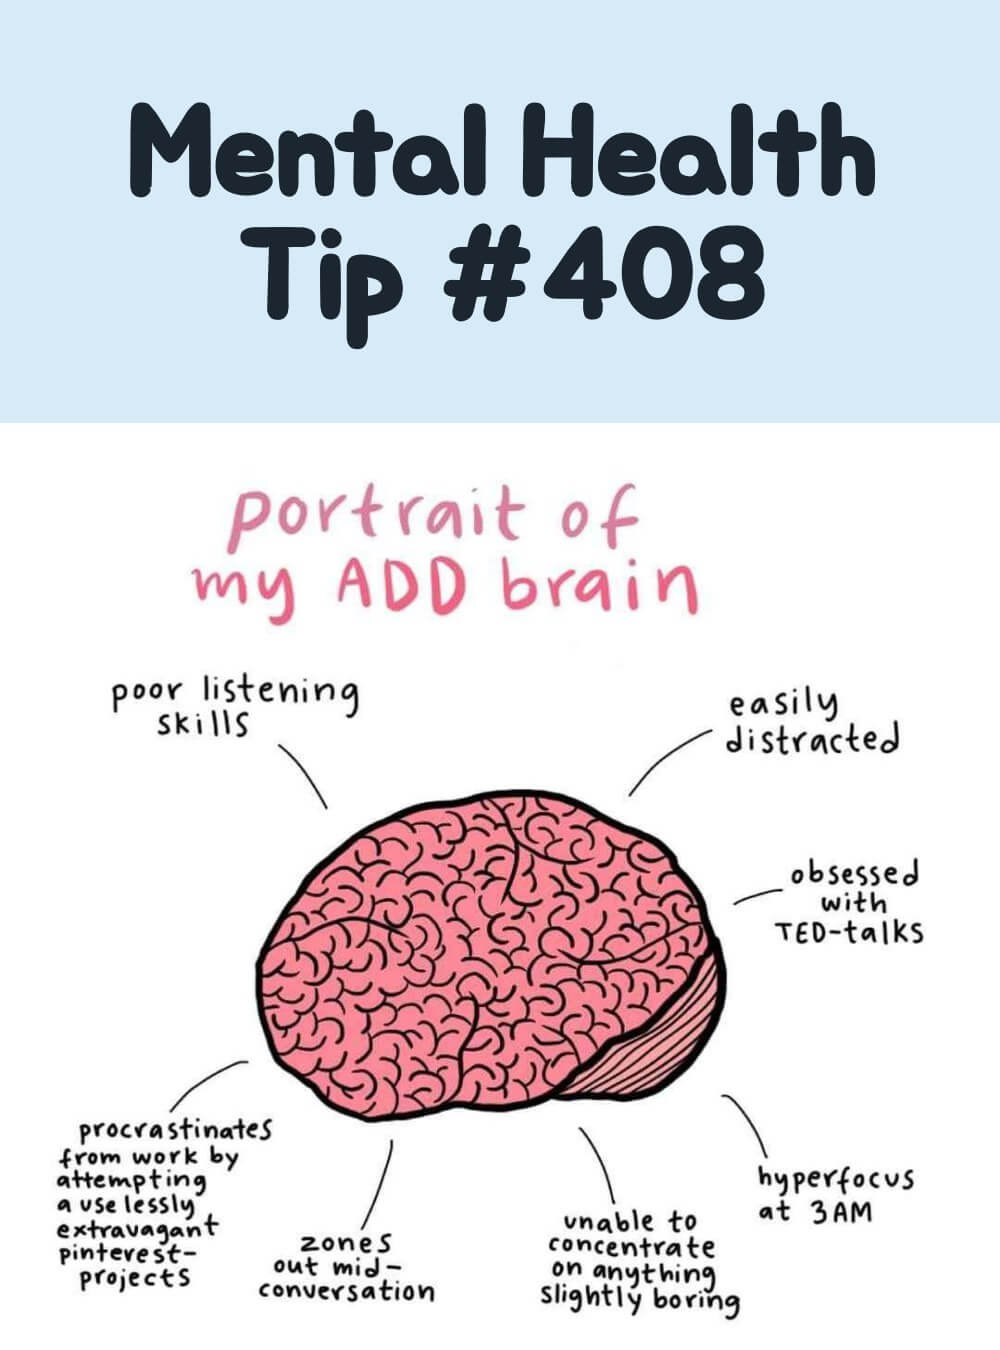 Emotional Well-being Infographic | Mental Health Tip #408